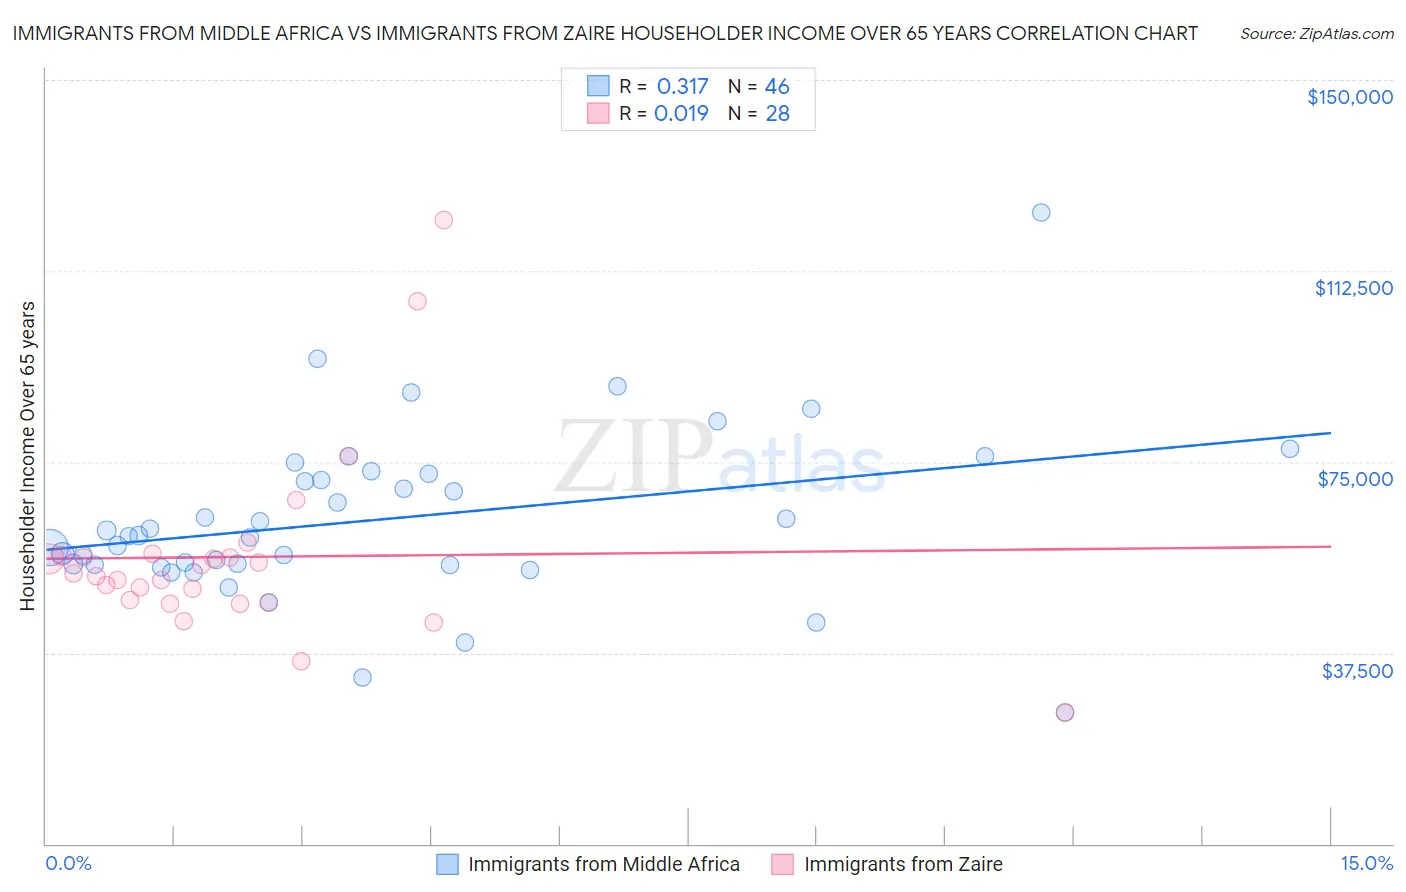 Immigrants from Middle Africa vs Immigrants from Zaire Householder Income Over 65 years